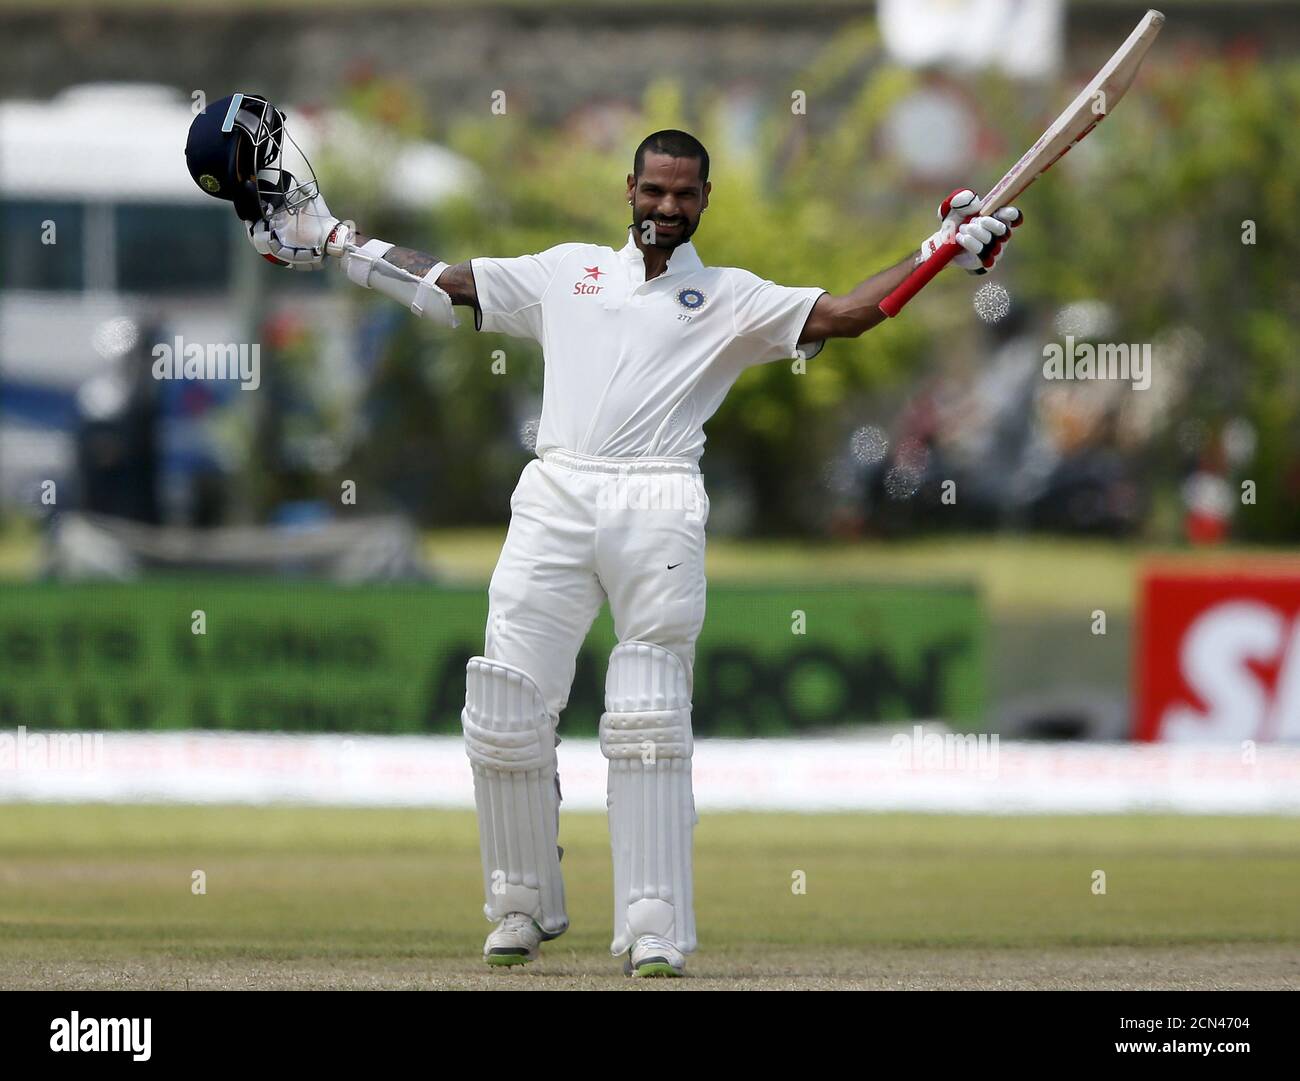 India's Shikhar Dhawan celebrates his century during the second day of their first test cricket match against Sri Lanka in Galle, August 13, 2015. REUTERS/Dinuka Liyanawatte Stock Photo